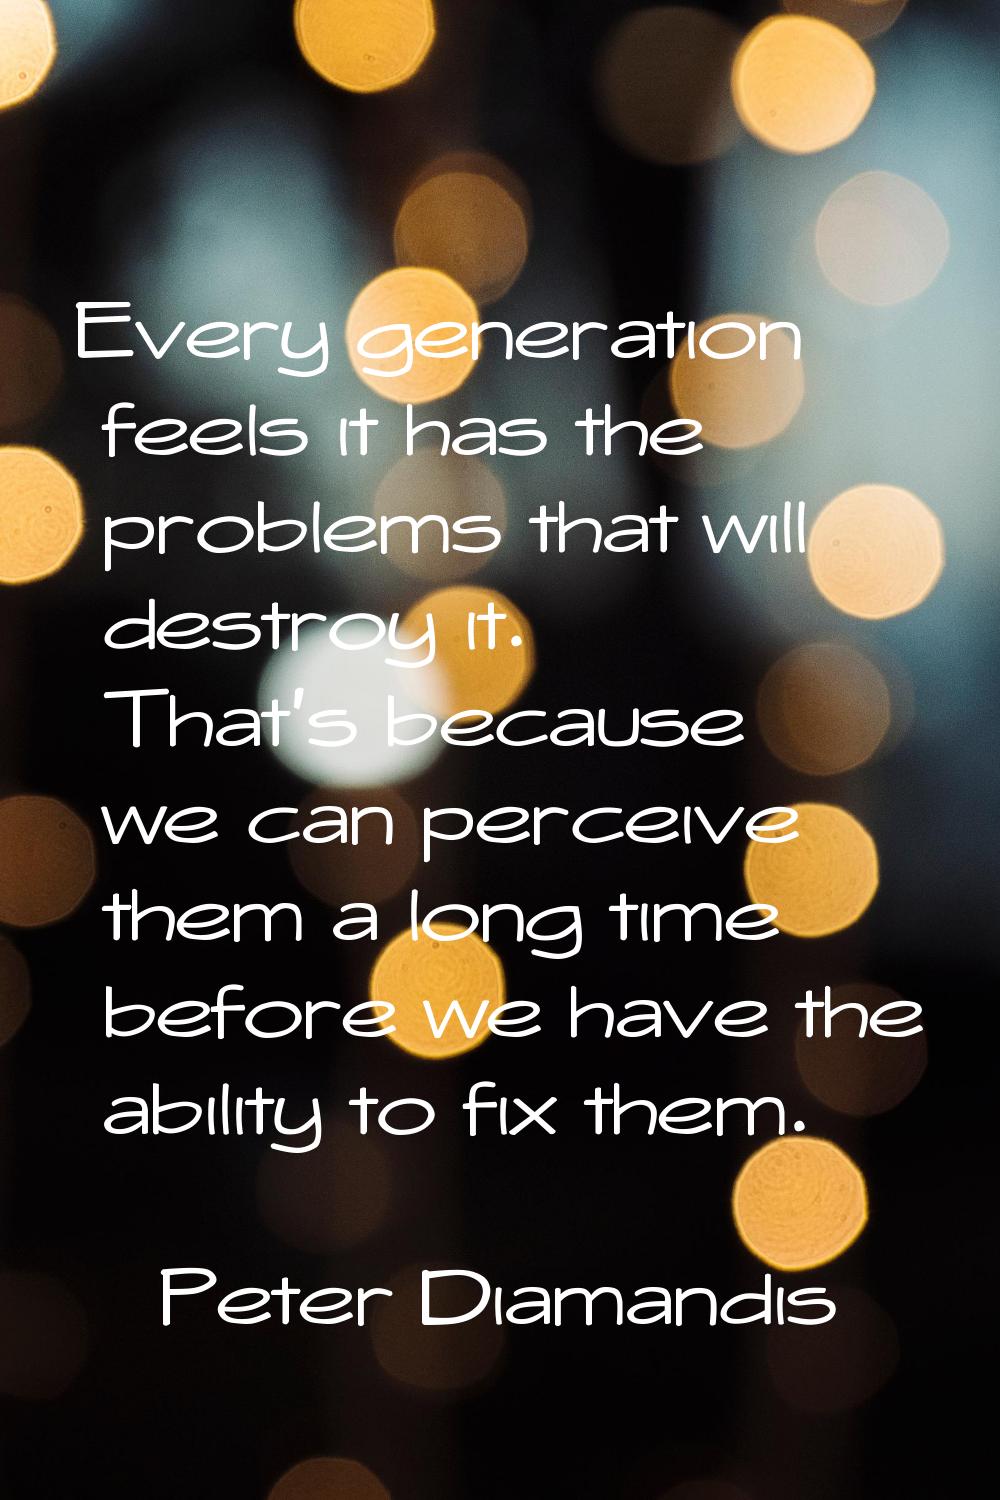 Every generation feels it has the problems that will destroy it. That's because we can perceive the